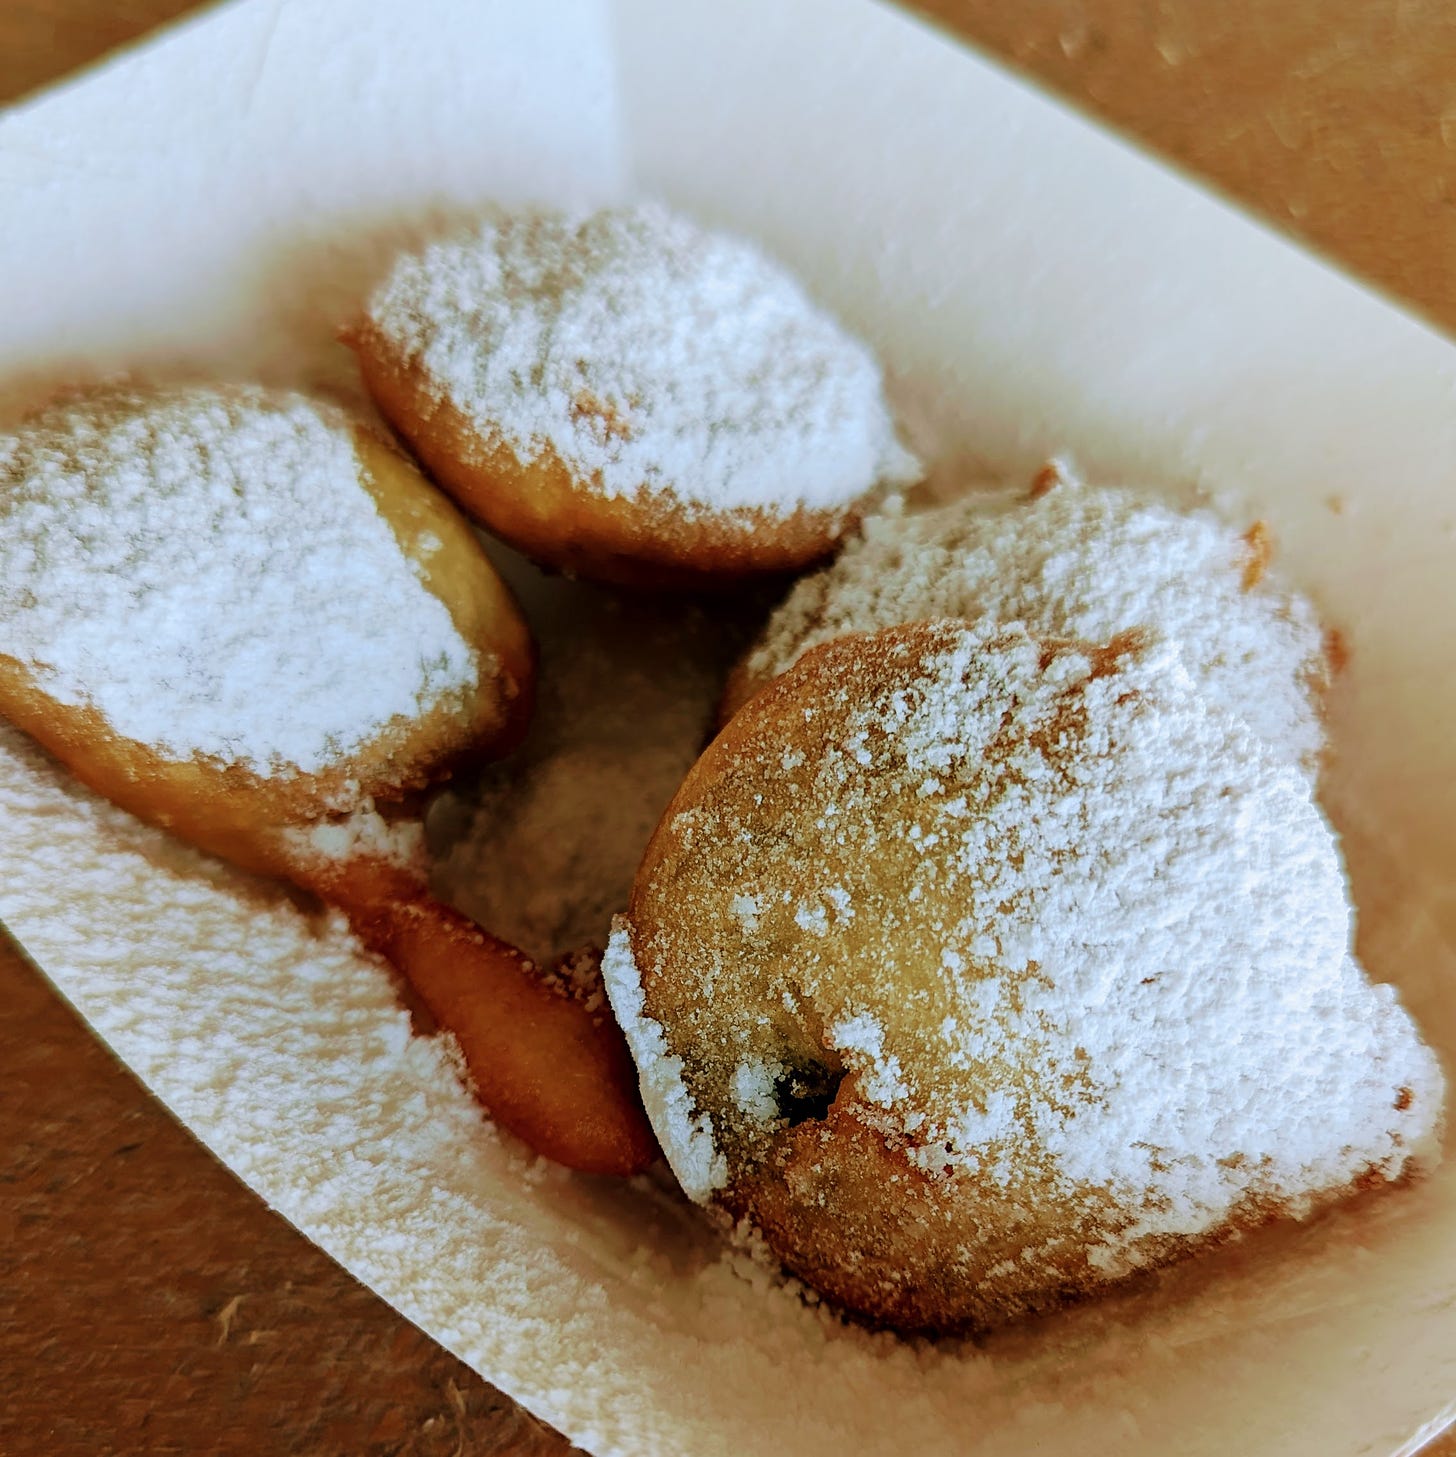 A container with fried Oreos covered in powdered sugar.